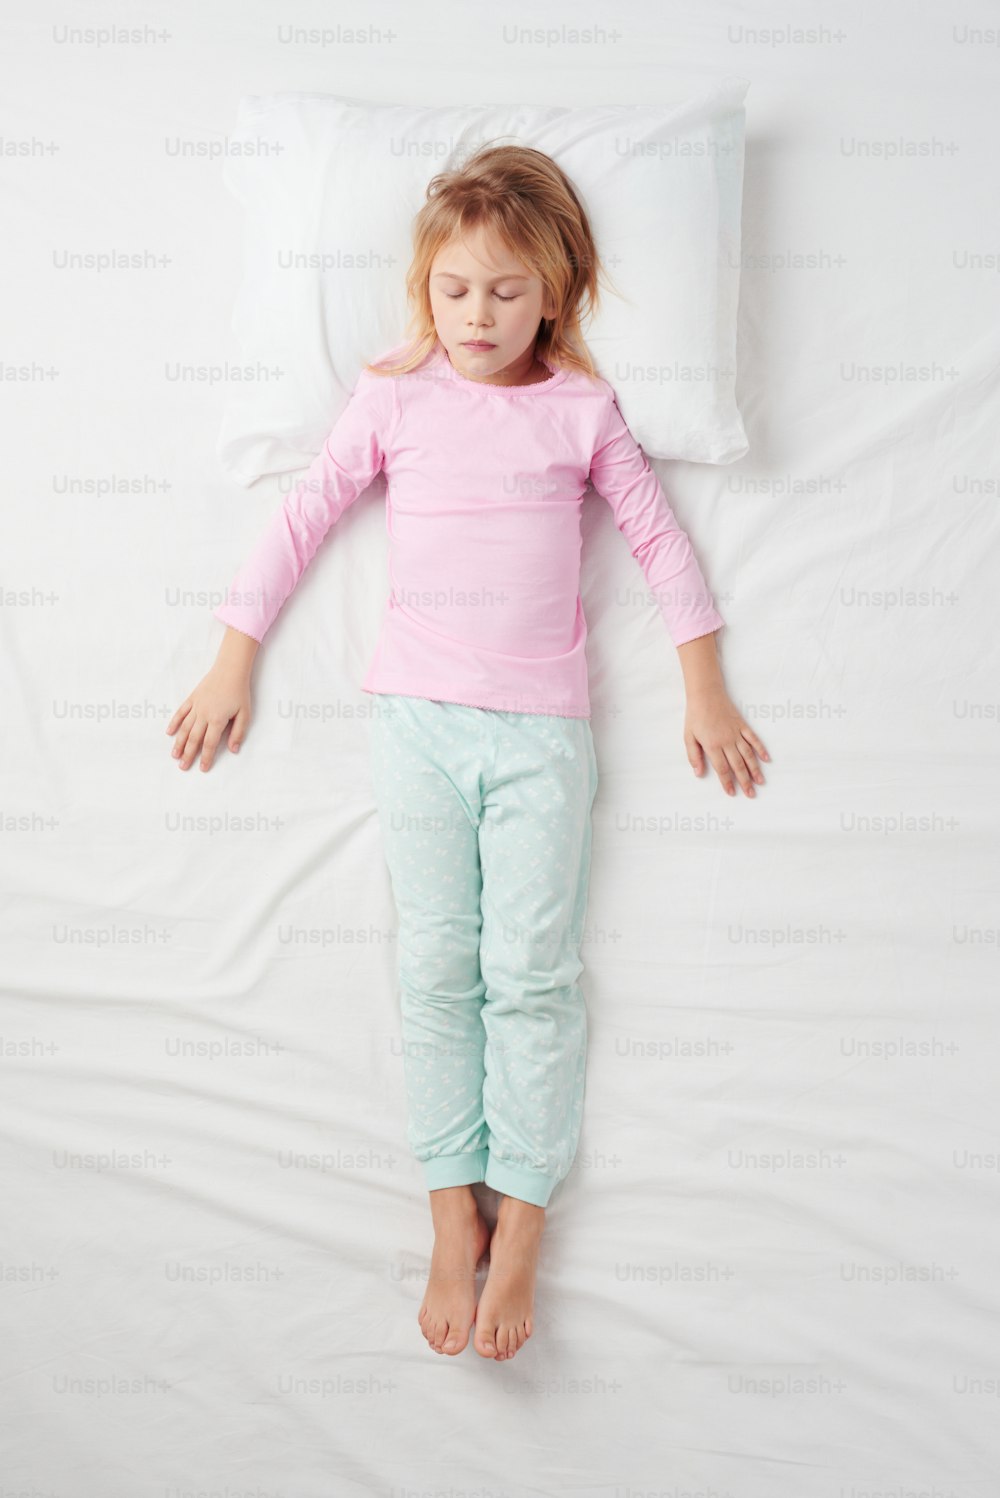 Top view photo of little girl sleeping on white bed. Quiet Soldier pose. Concept of sleeping poses